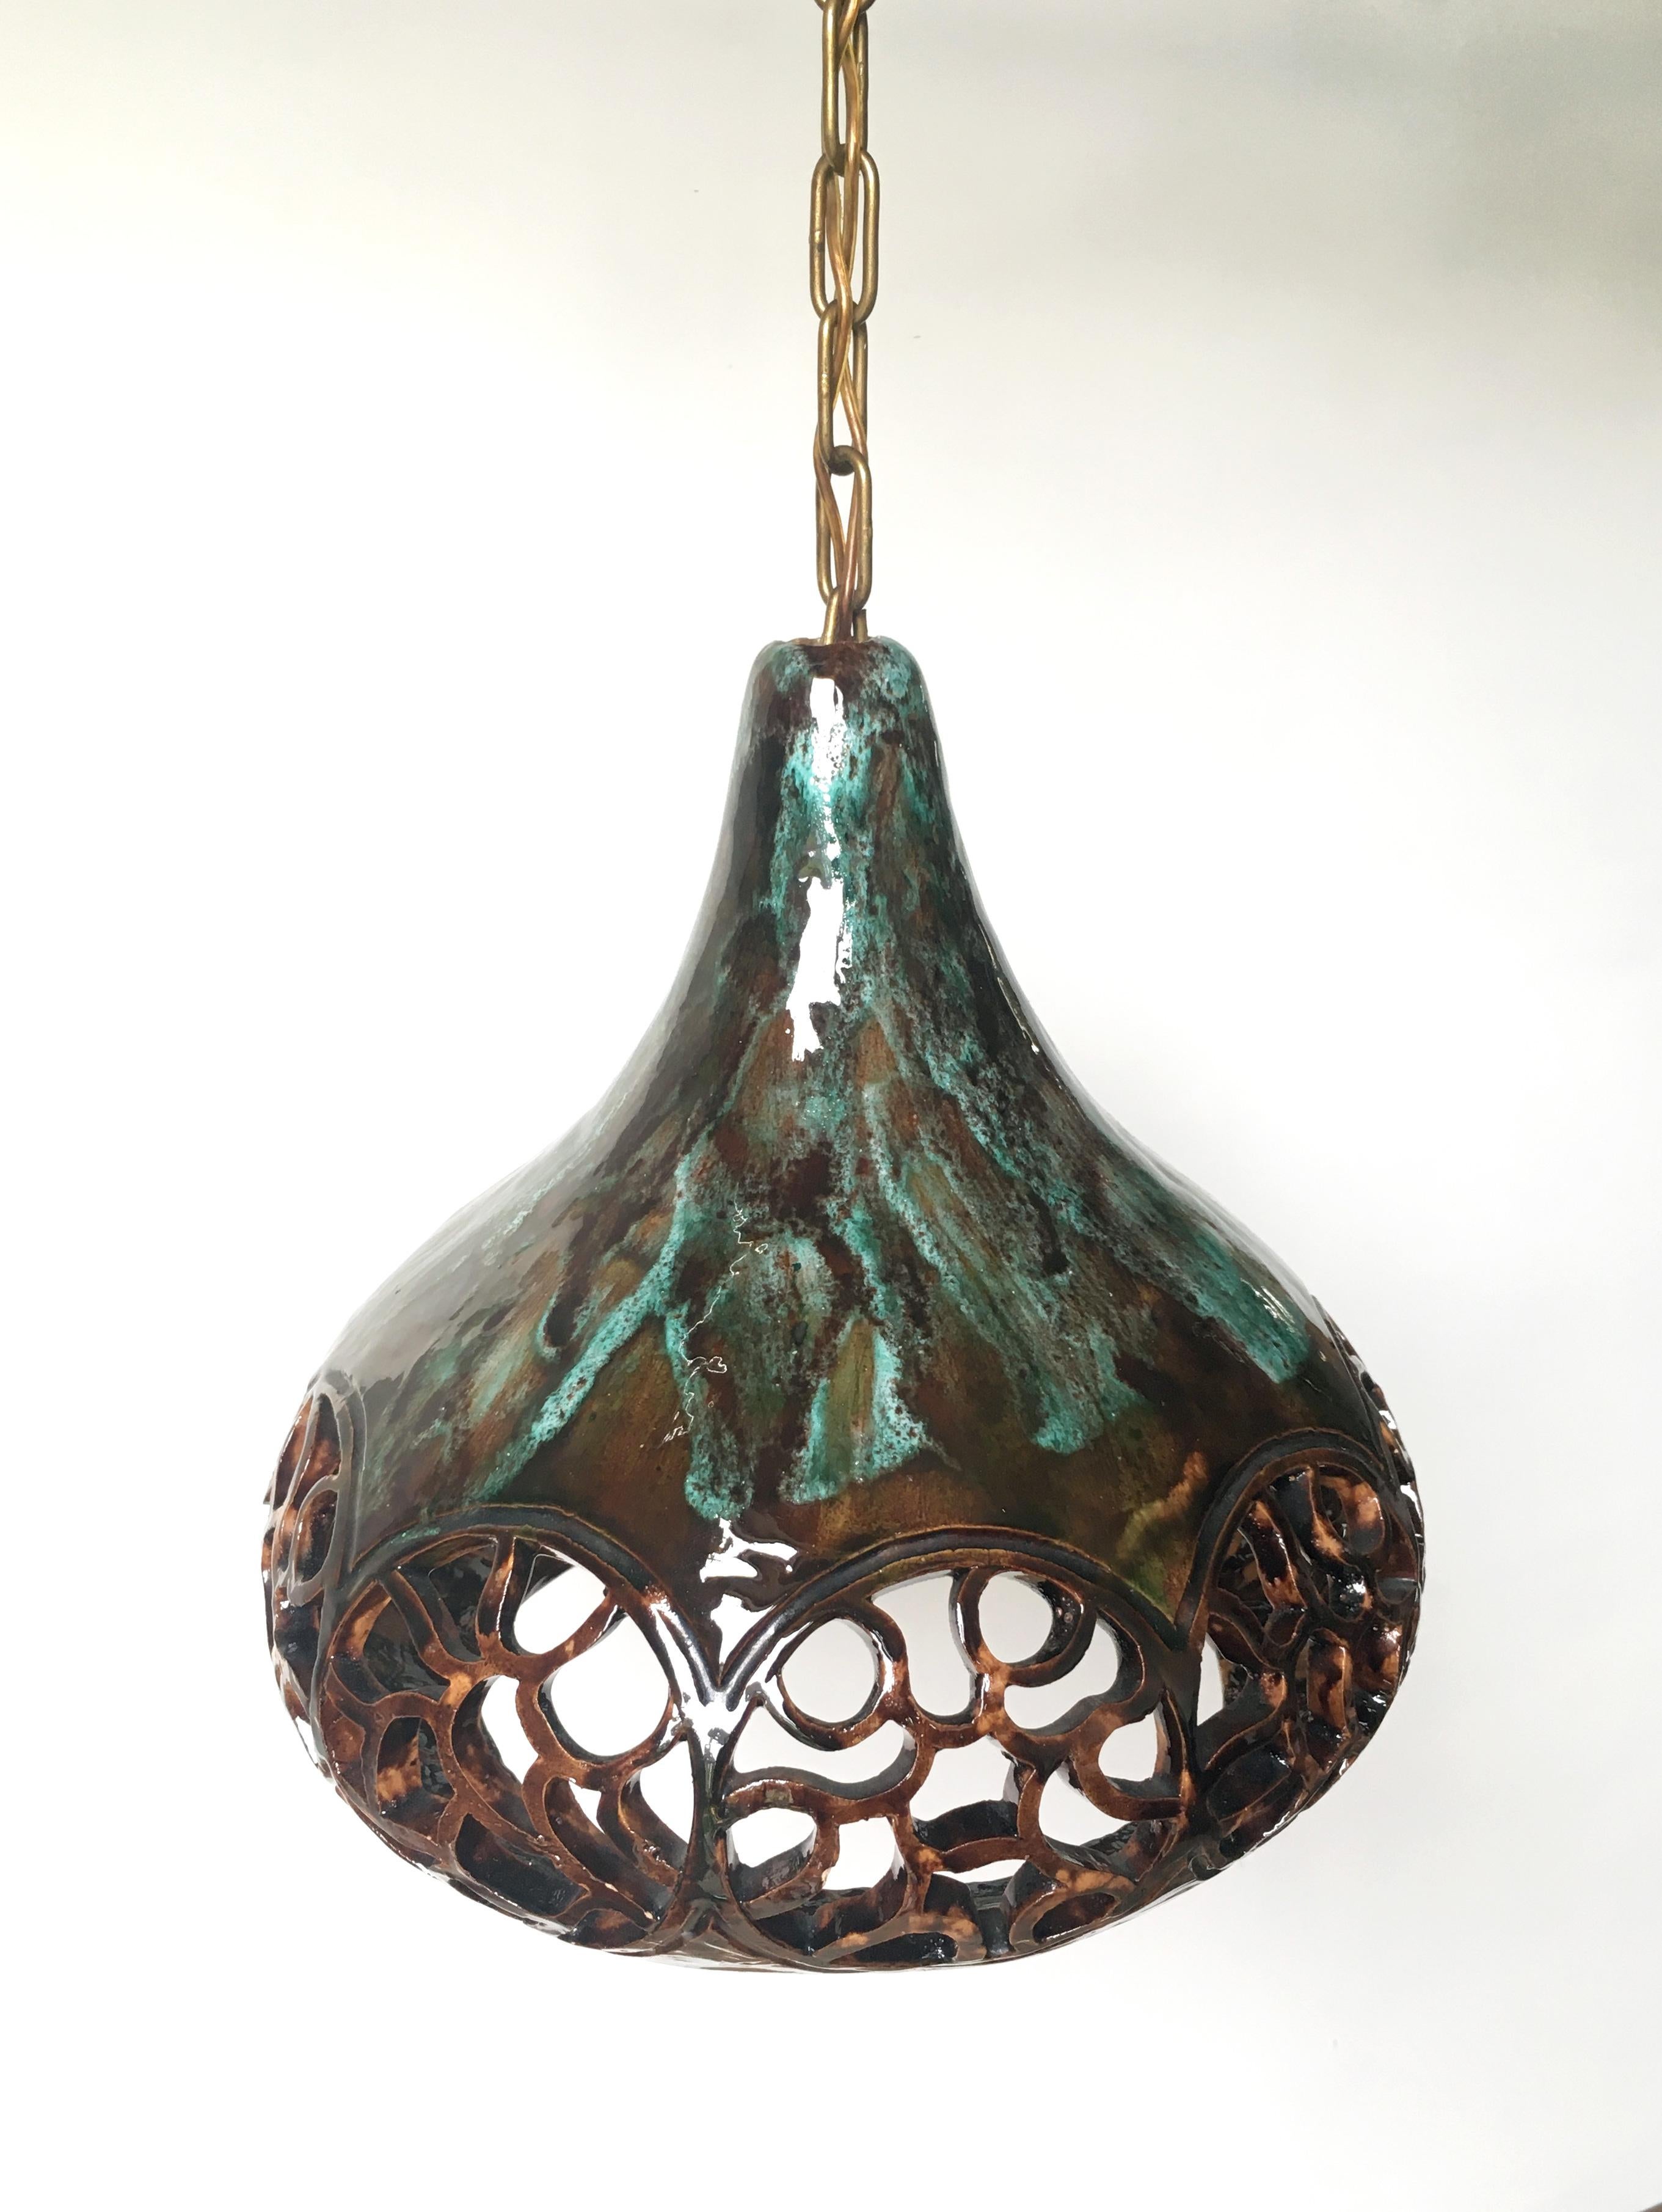 Bell shaped handmade Danish midcentury modern ceramic pendant from the 1960s. Turquoise, dark green, warm browns and earthy colored running shiny glaze with beautiful organic cutouts around the belly of the pendant. Peachy orange glaze on the